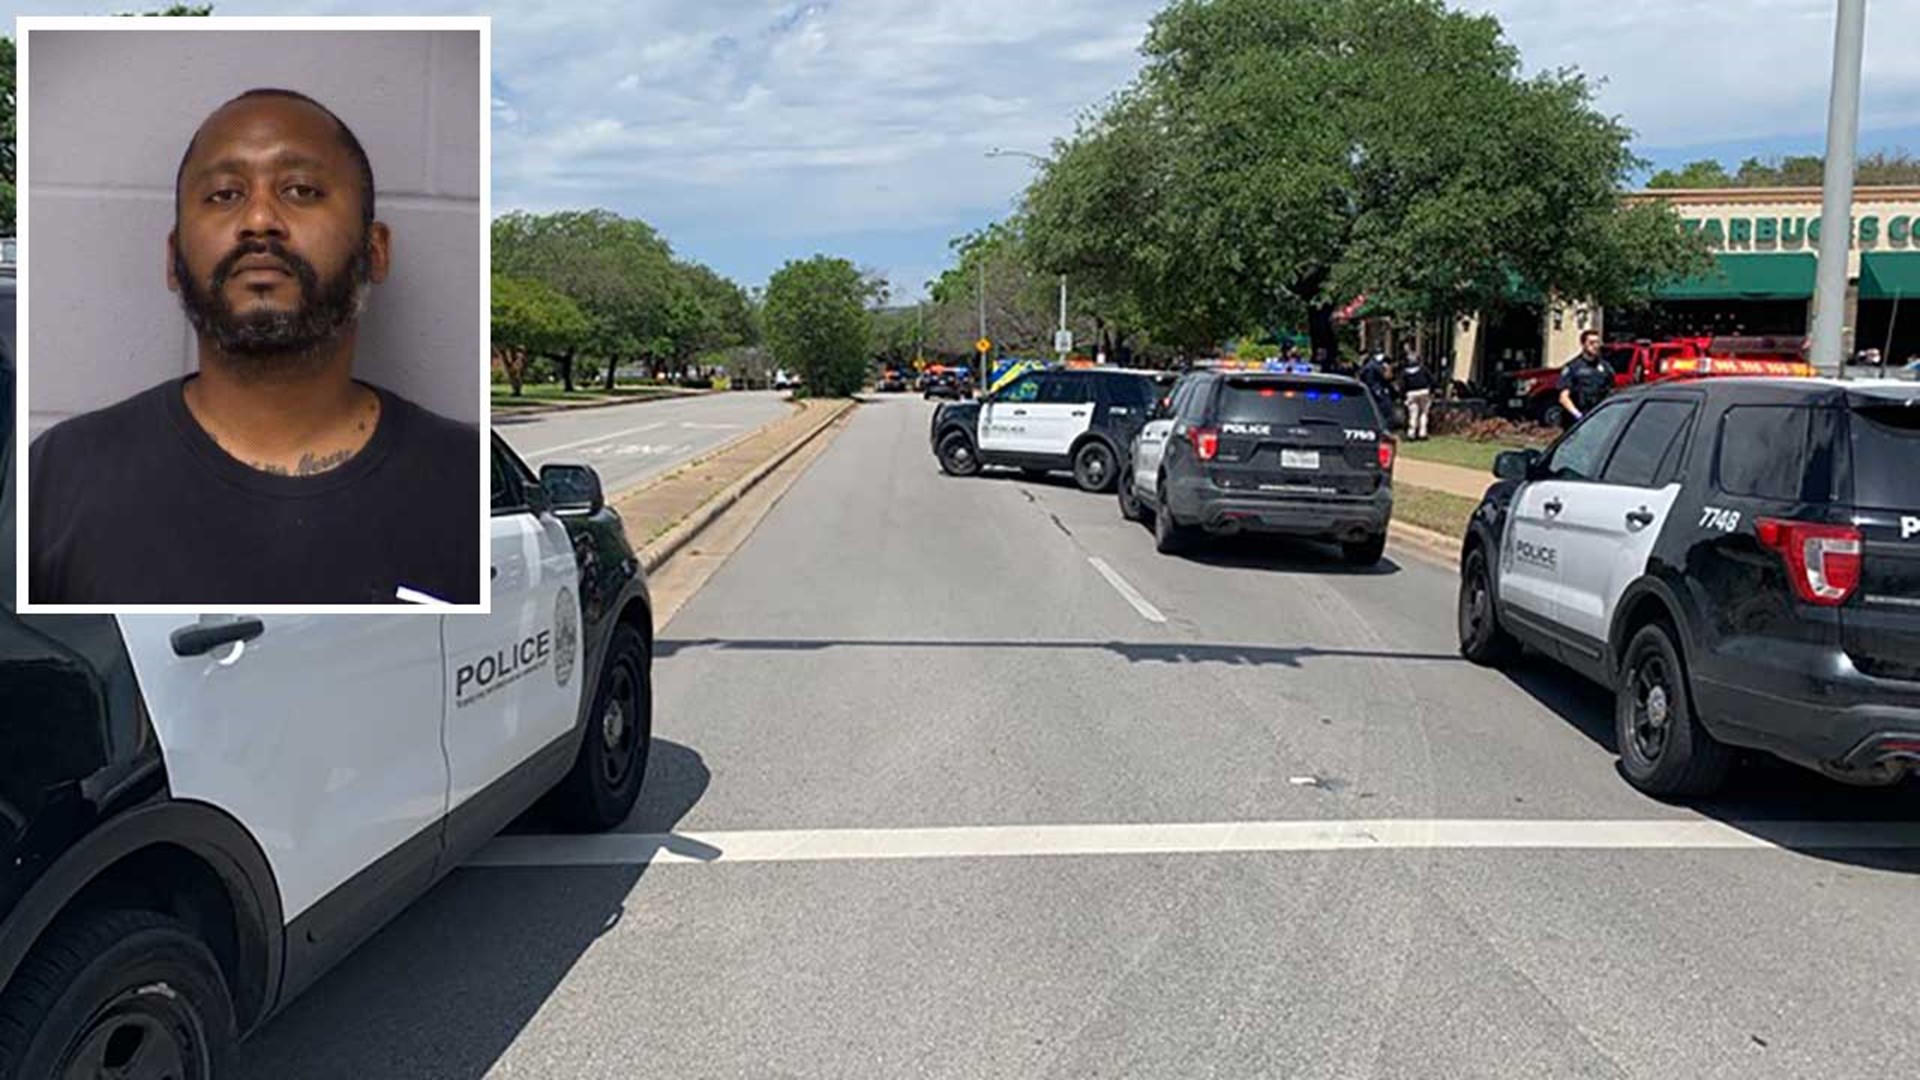 Three people were killed in an "active attack" in northwest Austin Sunday morning, officials confirmed